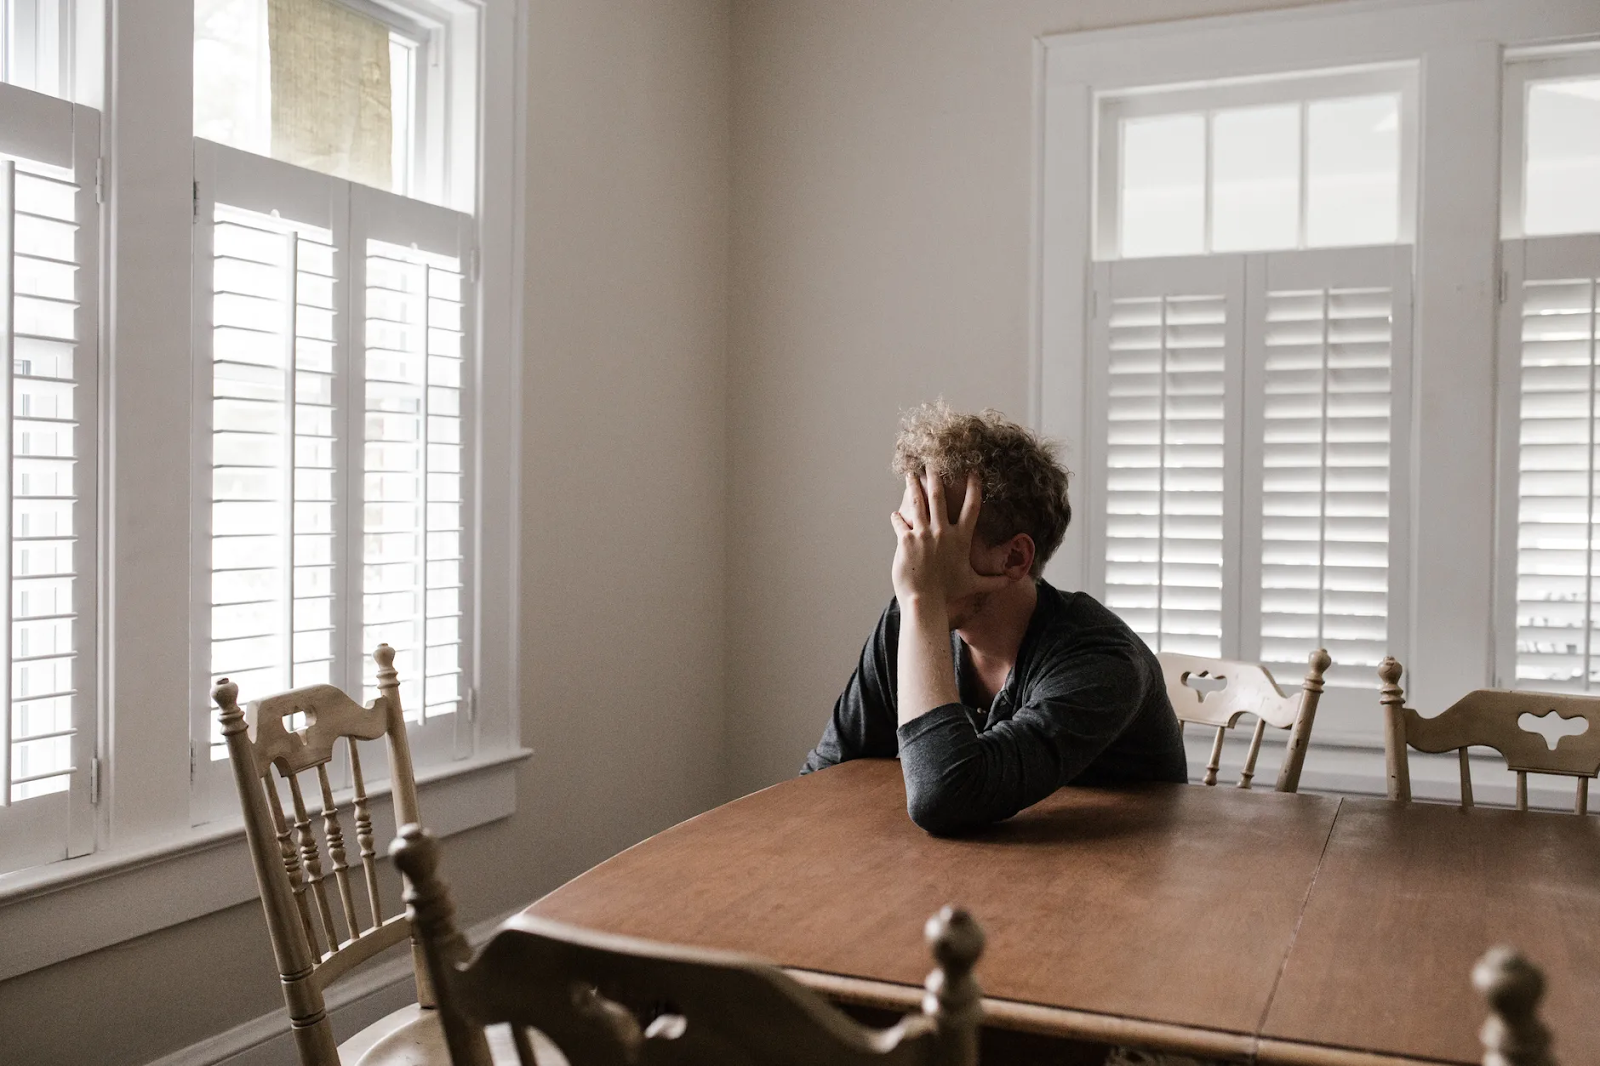 A man tiredly clutches his head in his hand as he leans across a dining room table